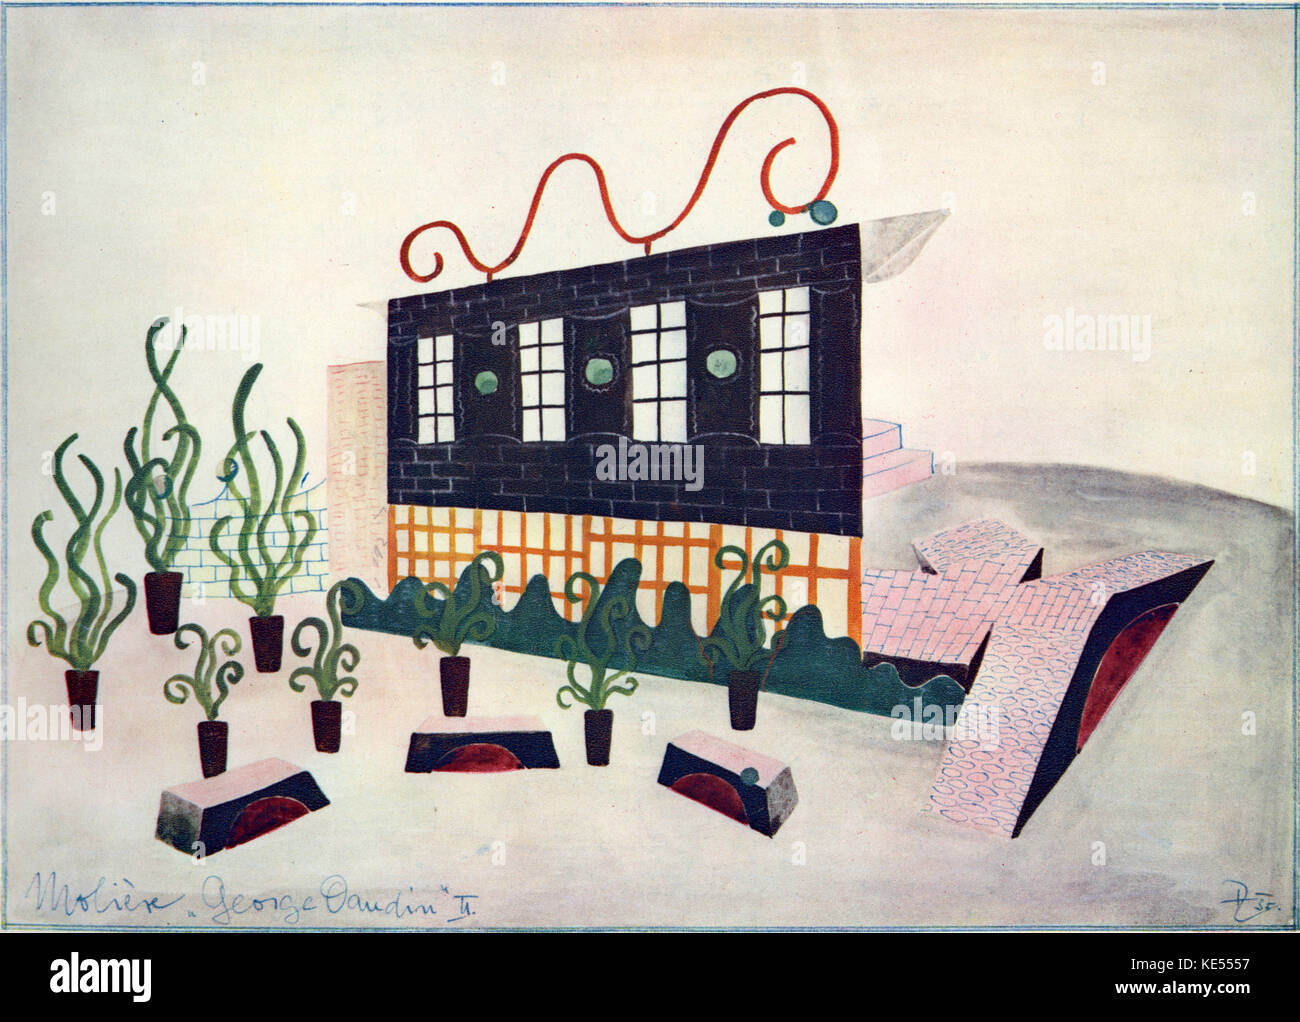 Set design for Moliere 's Georges Dandin. Design for Dandin 's country house by Frantisek Zelenka, Czech architect, graphic designer, and stage designer, 8 June 1904 - 19 October 1944. Produced by Vojta Novak at the Stavovske Theatre, Prague, 1935. Moliere: French playwright and actor, January 1622 - 17 February 1673. Stock Photo